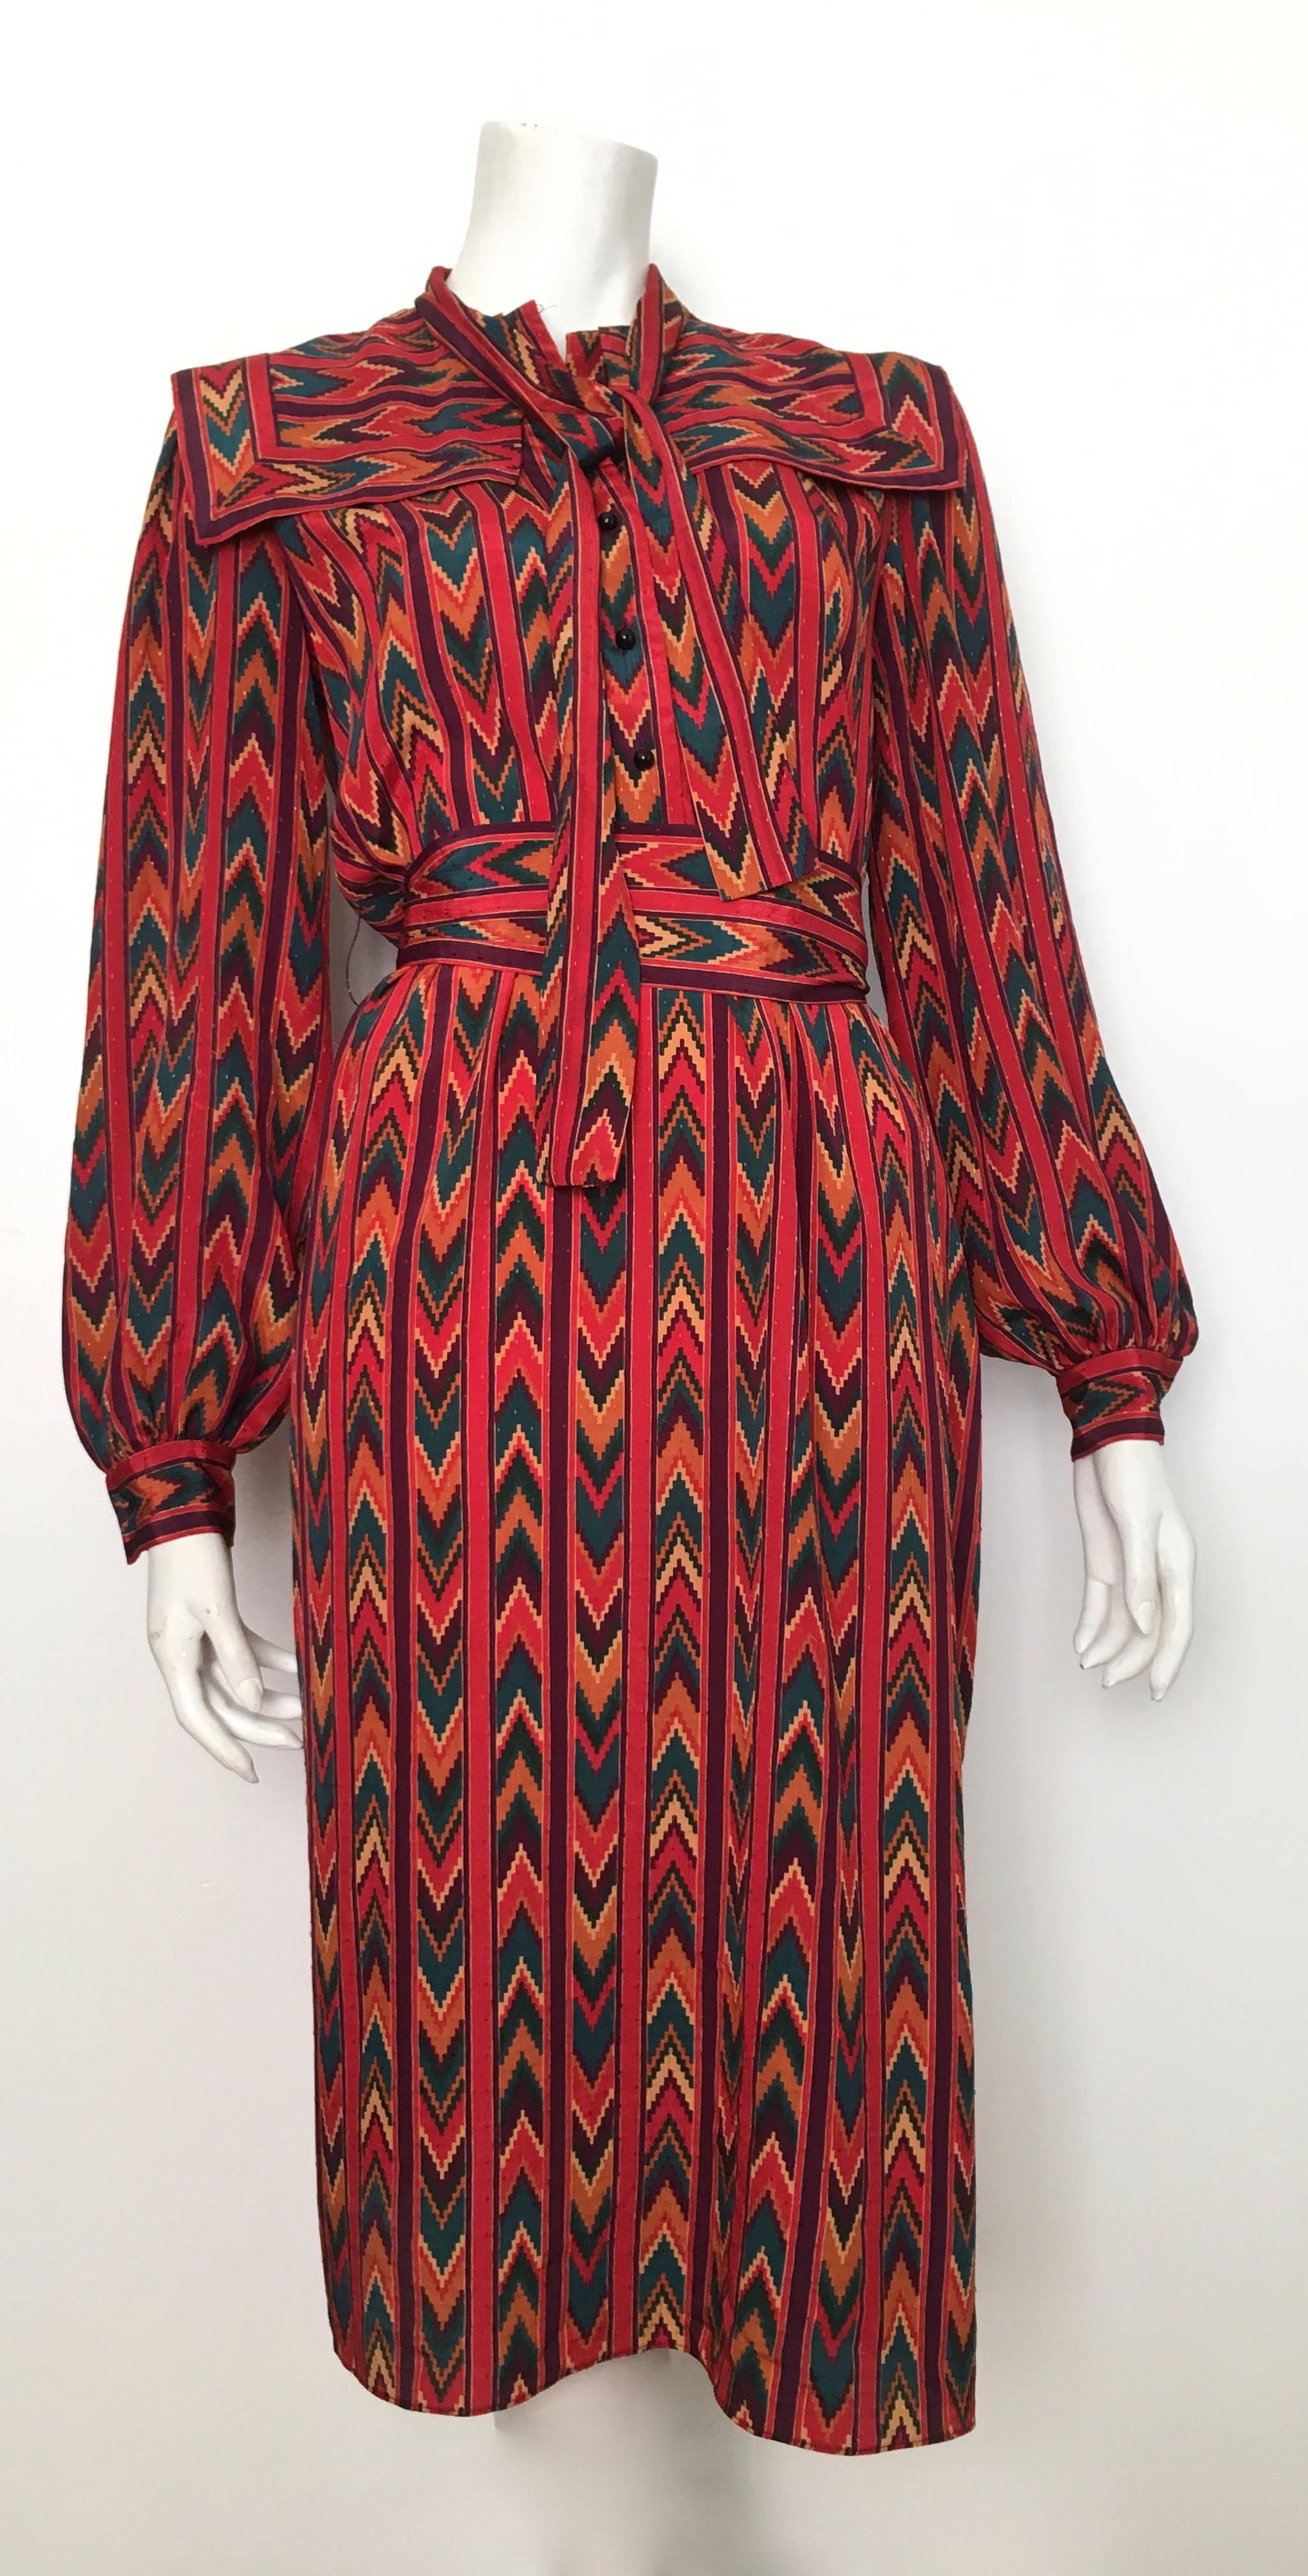 Molly Parnis Studio 1980s native American print long sleeve dress with sash tie belt is labeled a vintage size 4 but fits more like a modern day size 10.  The waist on this dress is 34